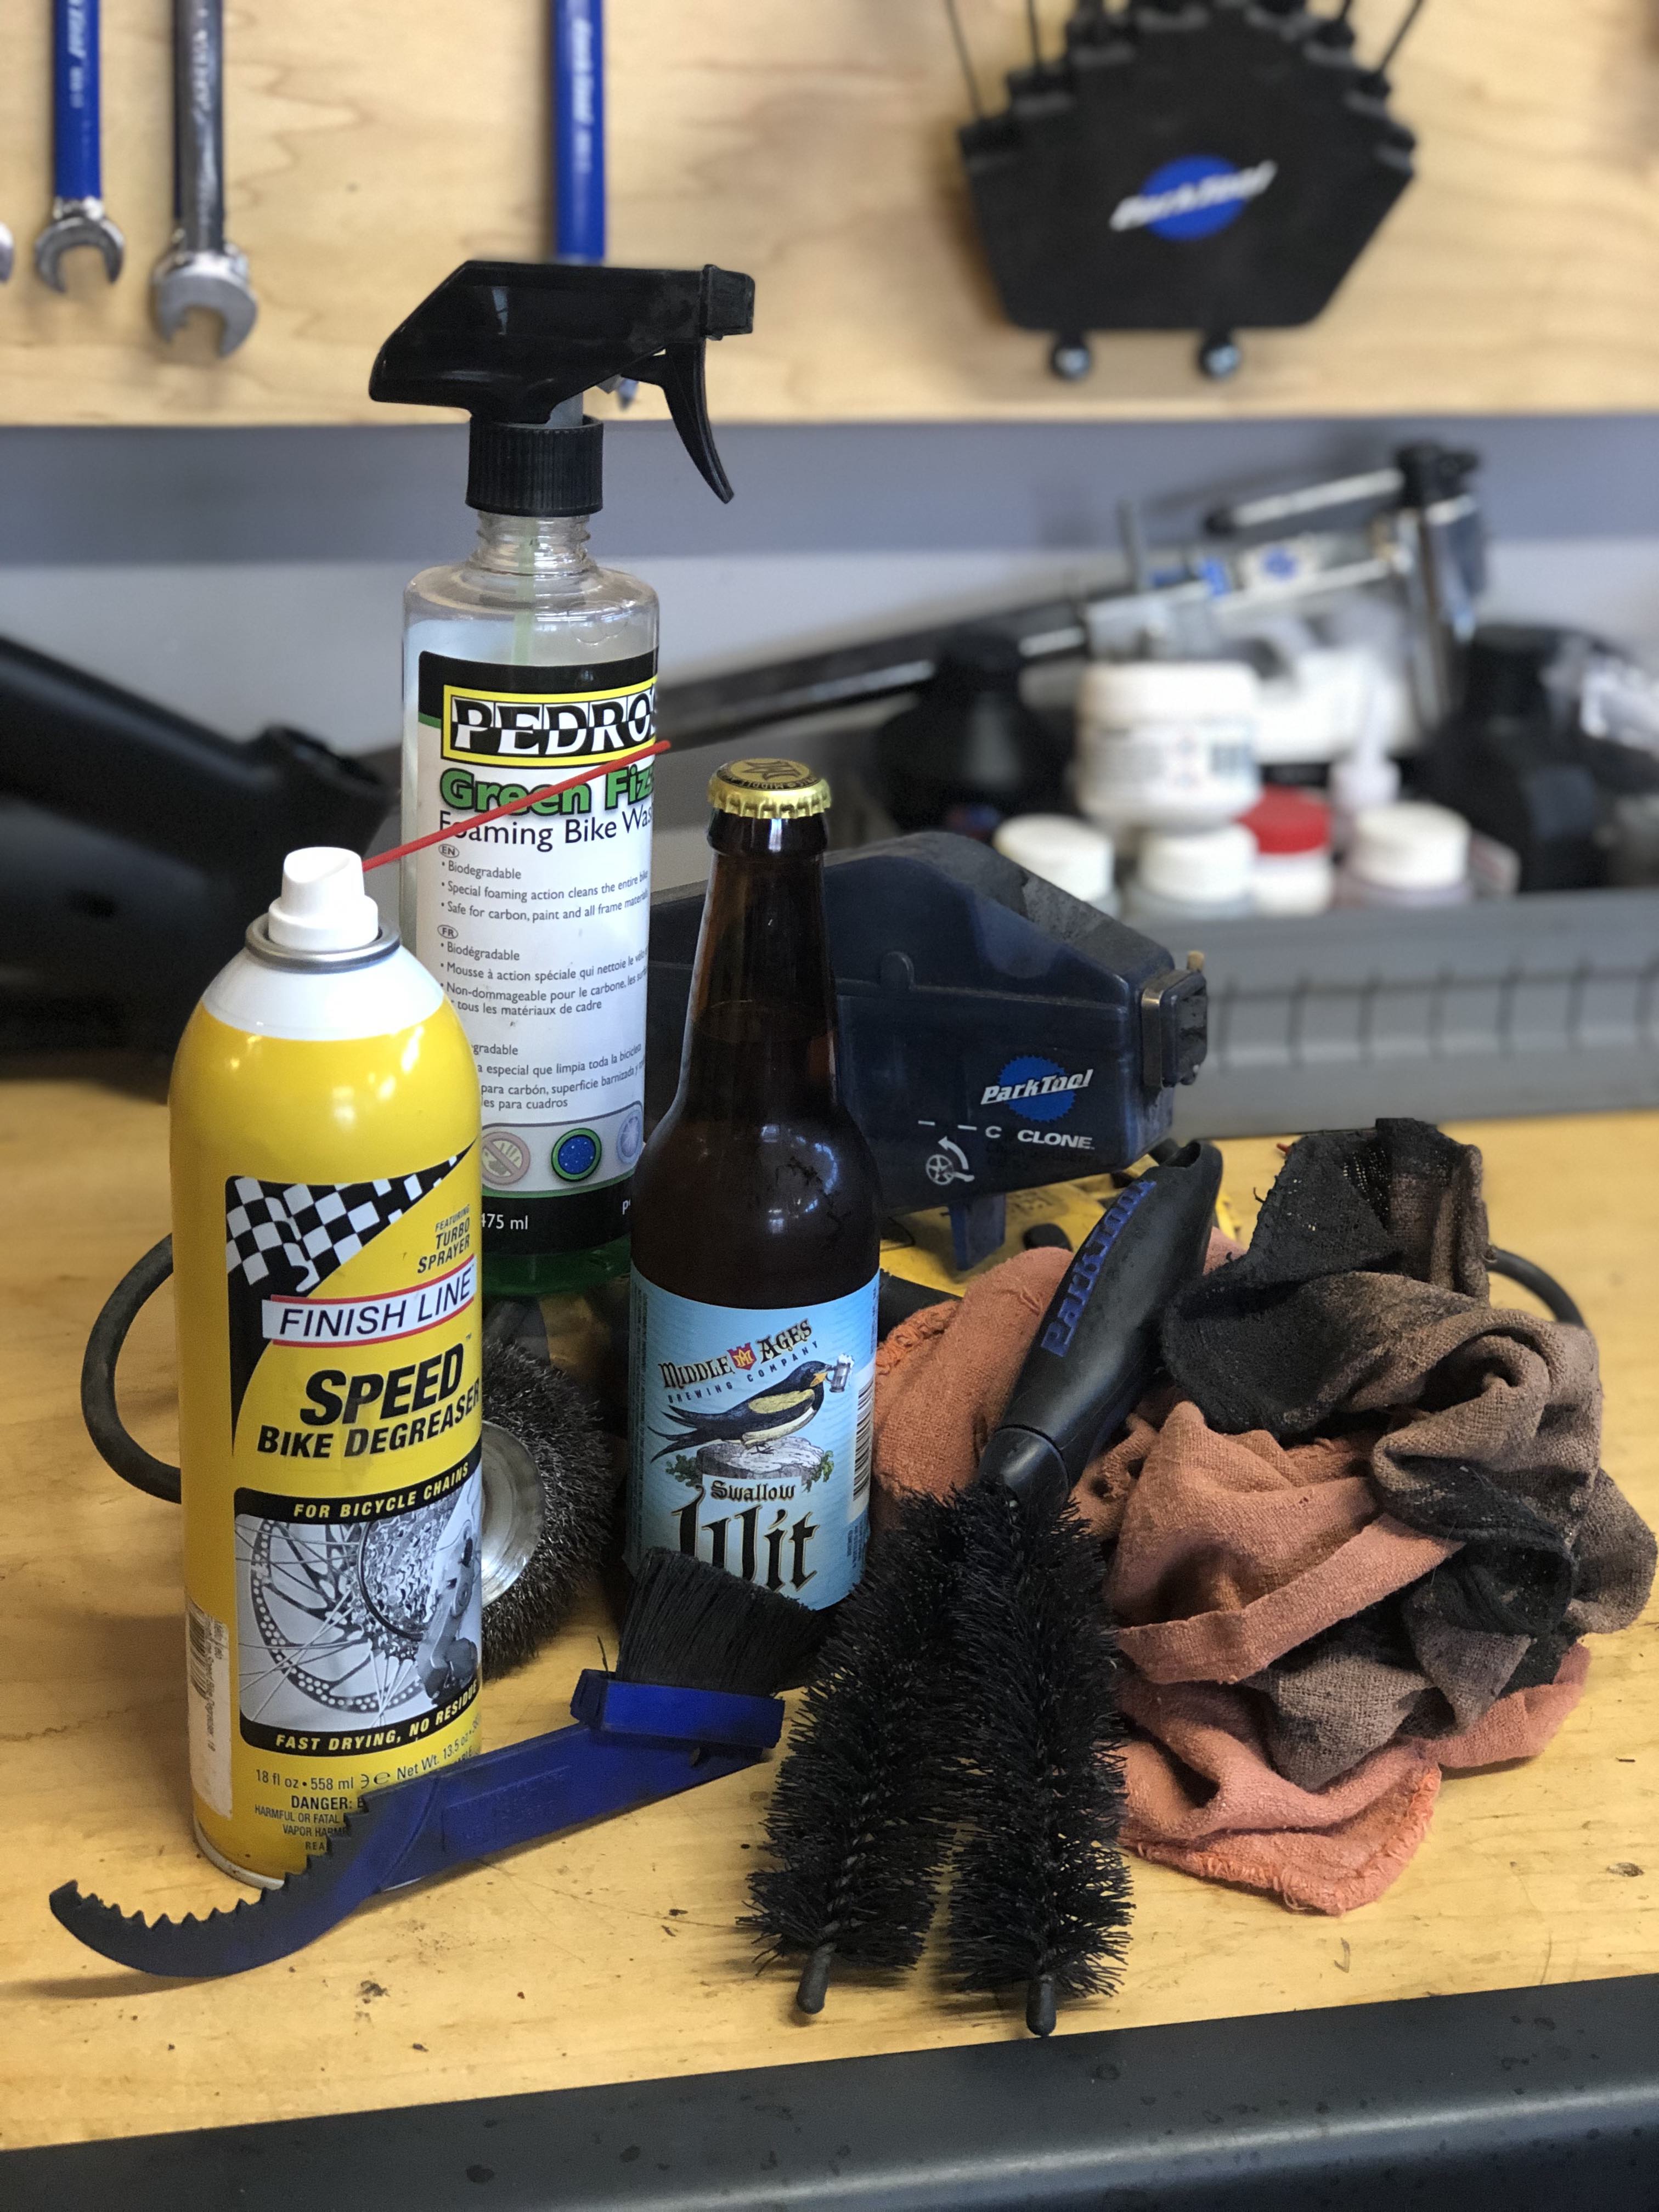 Bike cleaning tools and a beer